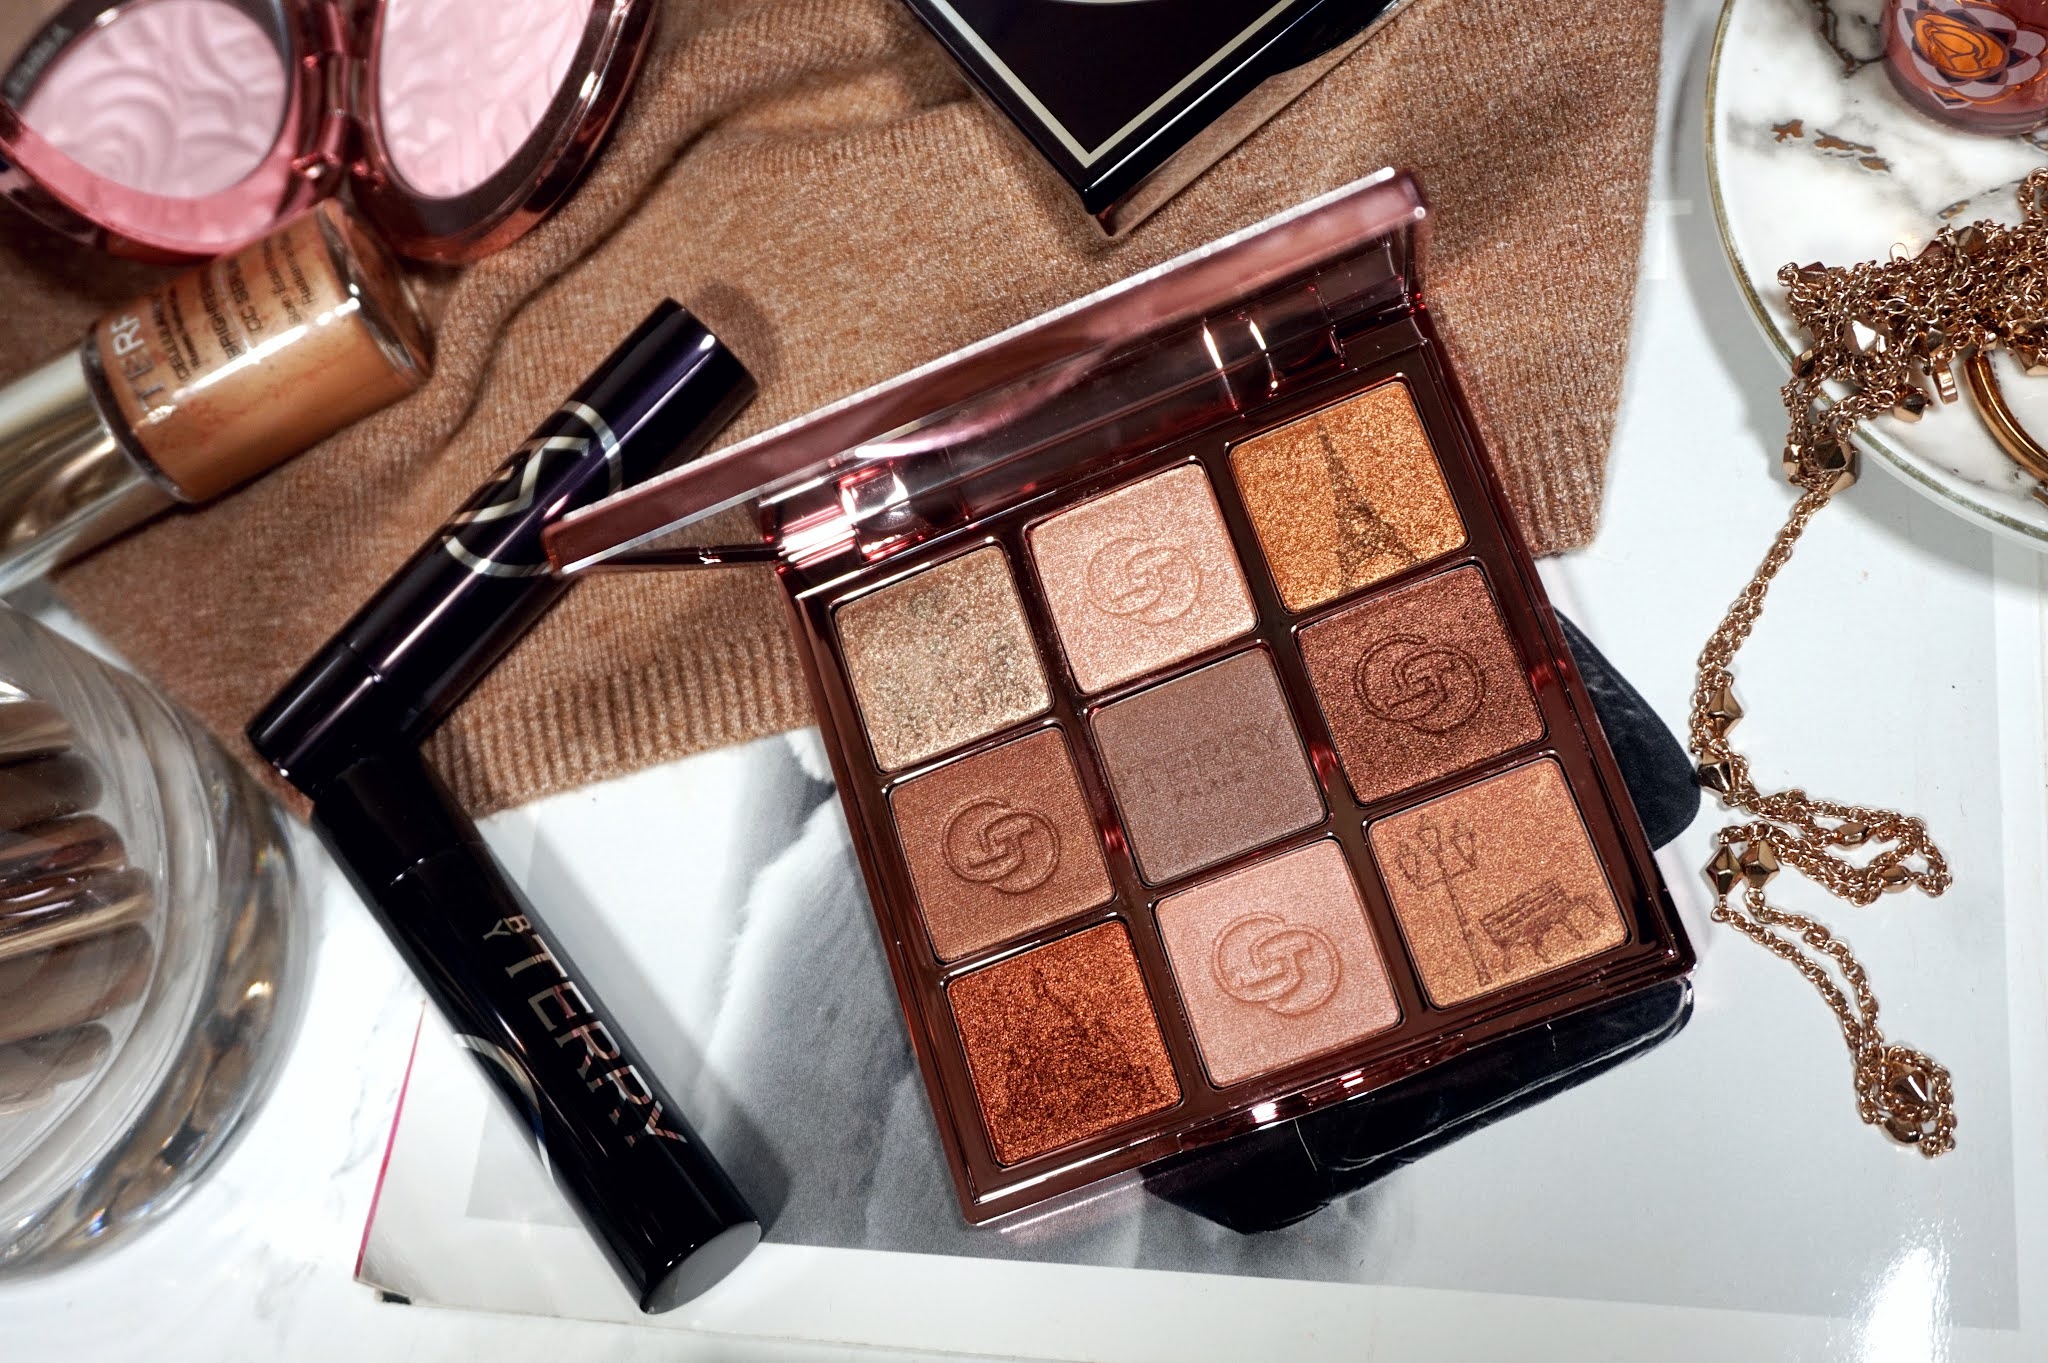 By Terry V.I.P. Expert Bonjour Paris Palette Review and Swatches